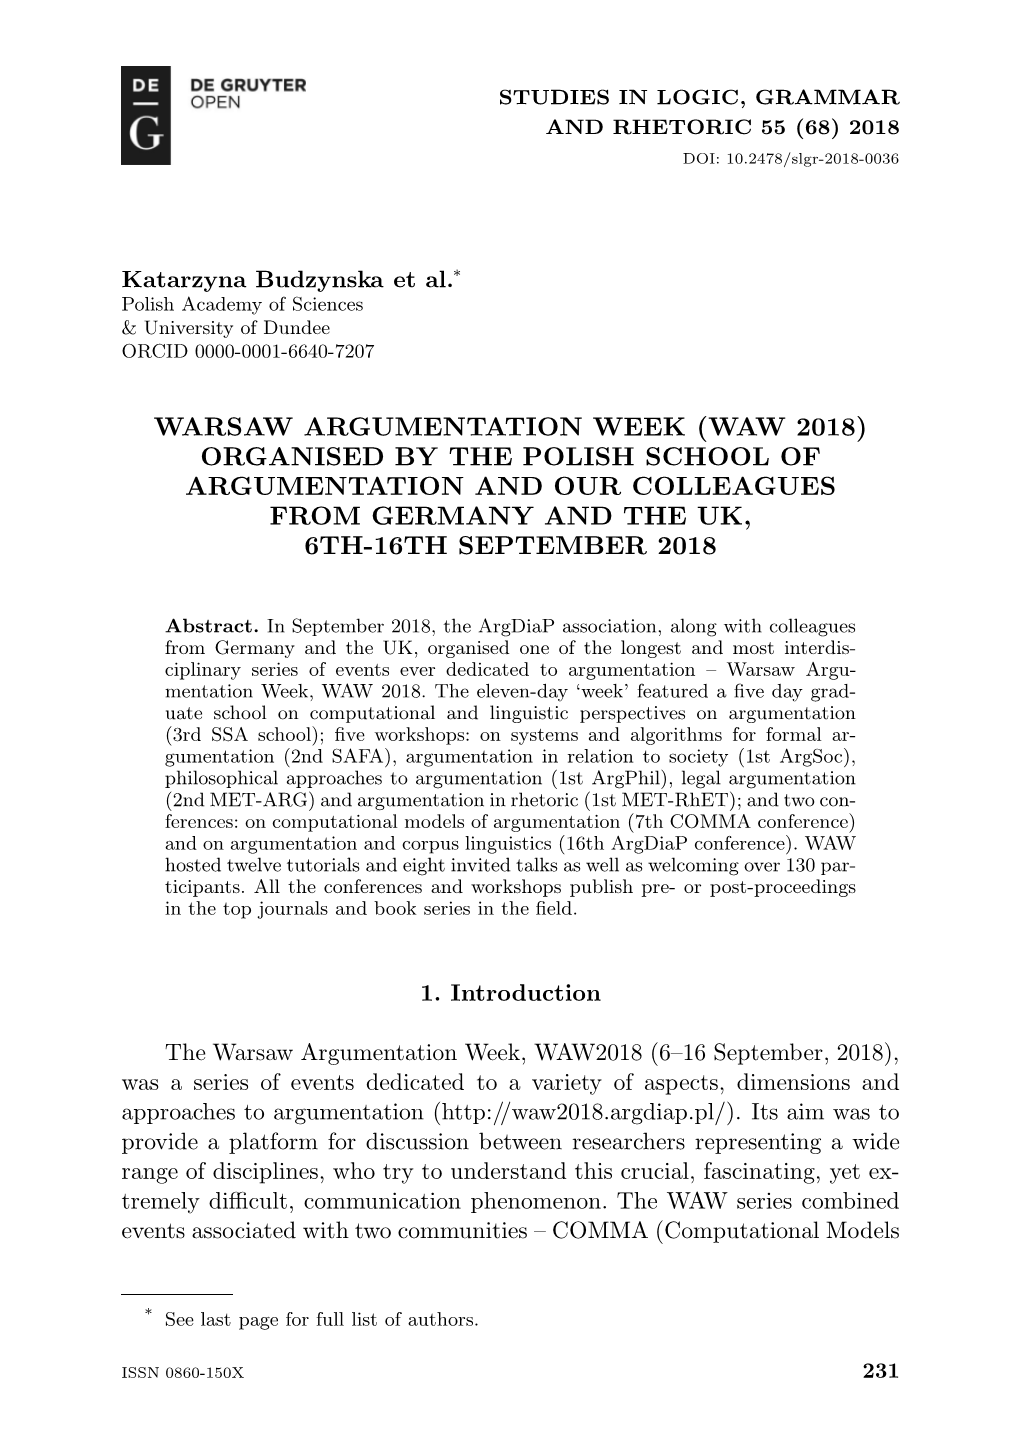 Warsaw Argumentation Week (Waw 2018) Organised by the Polish School of Argumentation and Our Colleagues from Germany and the Uk, 6Th-16Th September 2018